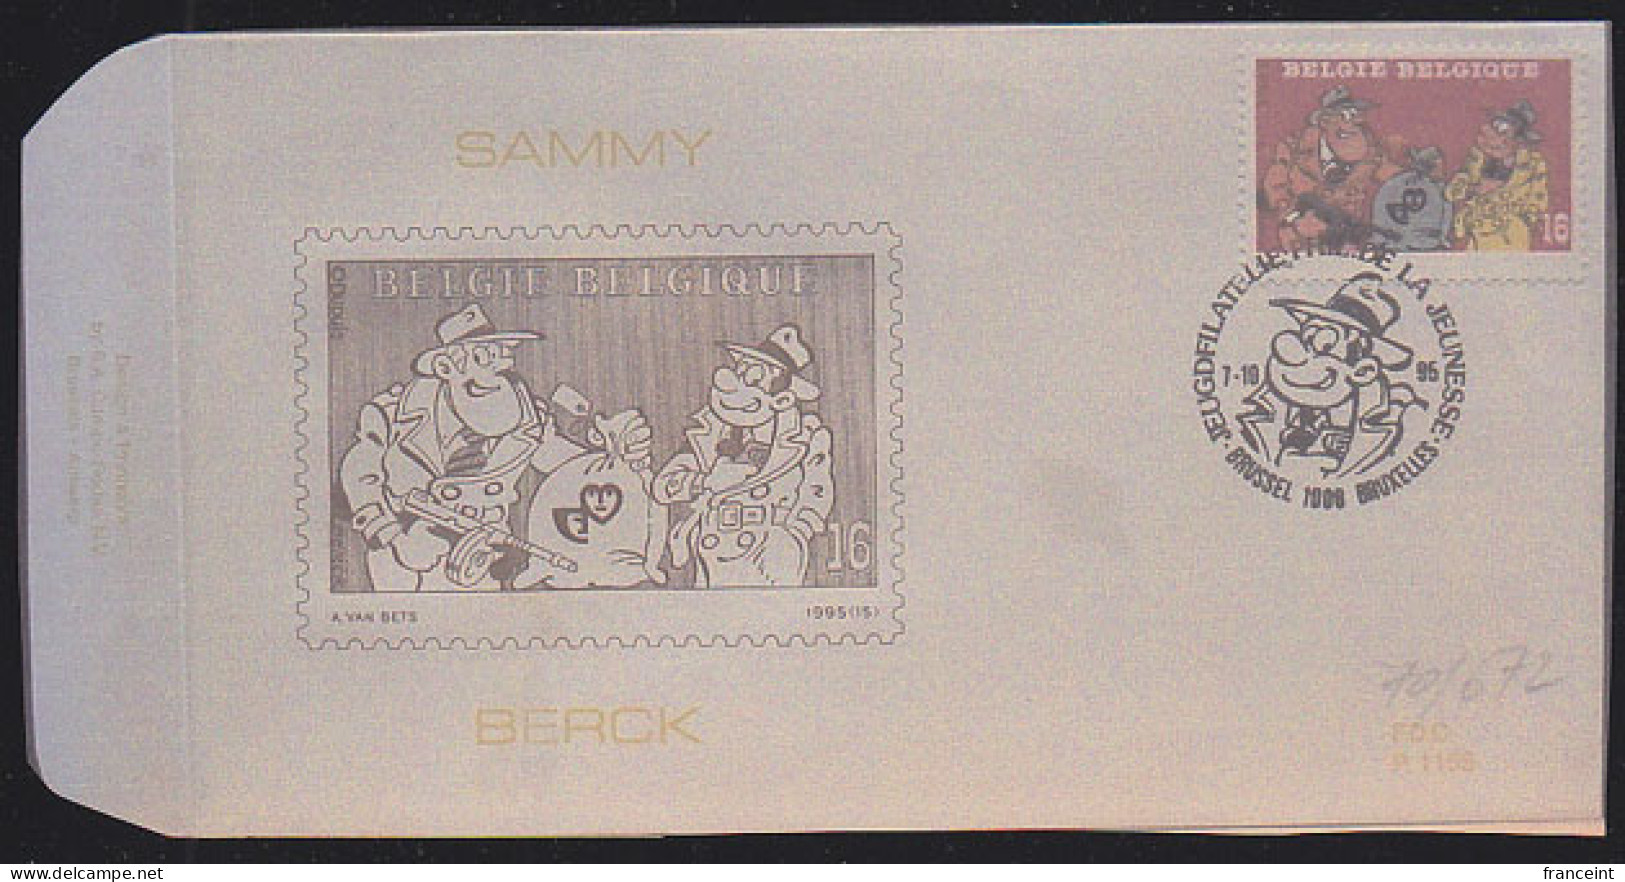 BELGIUM(1995) Sammy With Machine Gun. Die Proof In Blue Signed By The Engraver, Representing The FDC Cachet. Scott 1598 - Proeven & Herdruk